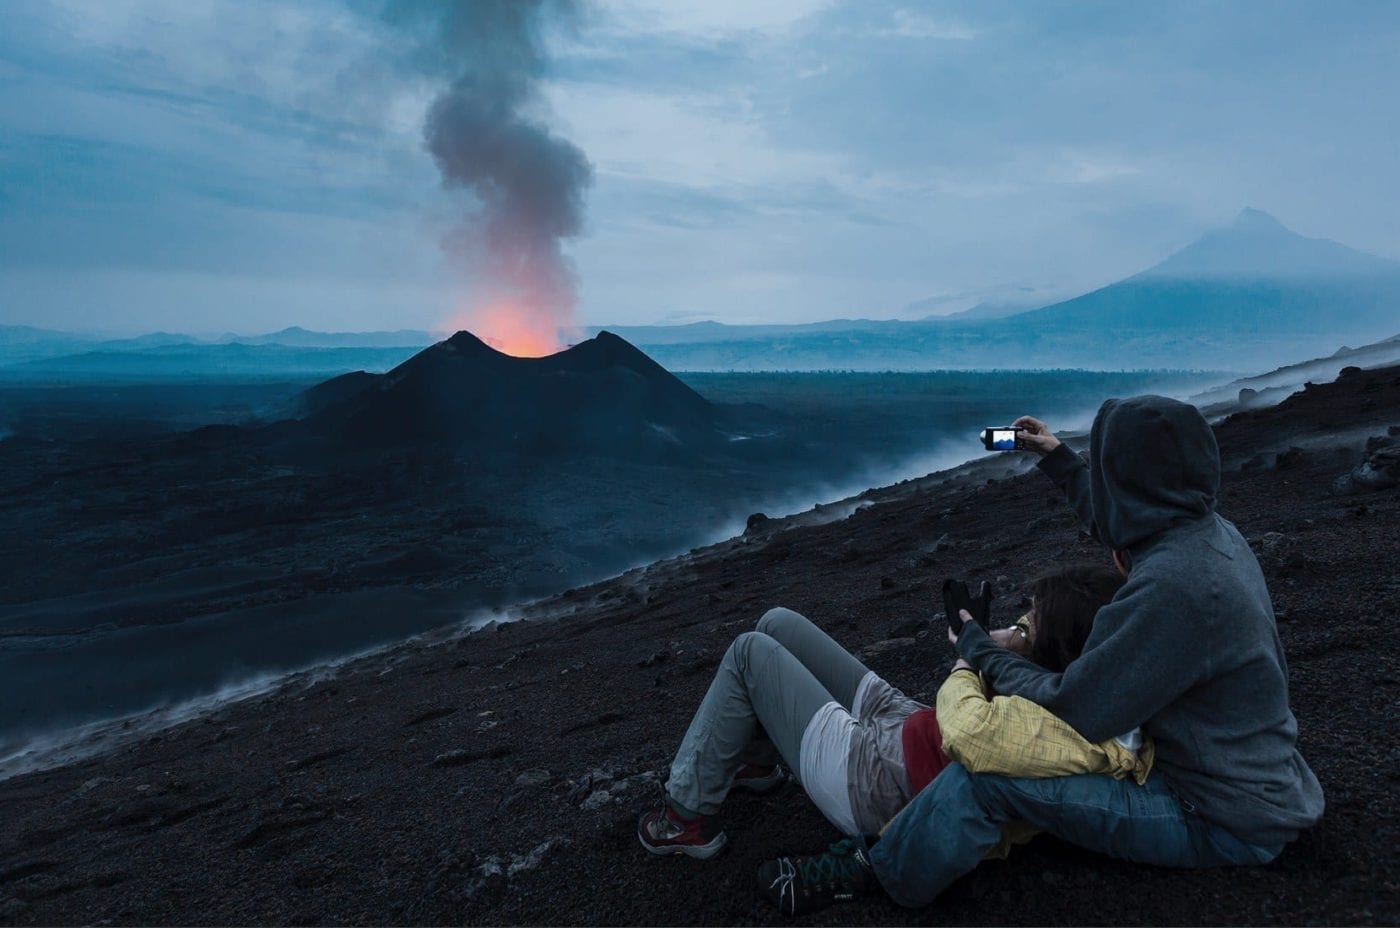 Nyamulagira volcano eruption being watched by guests